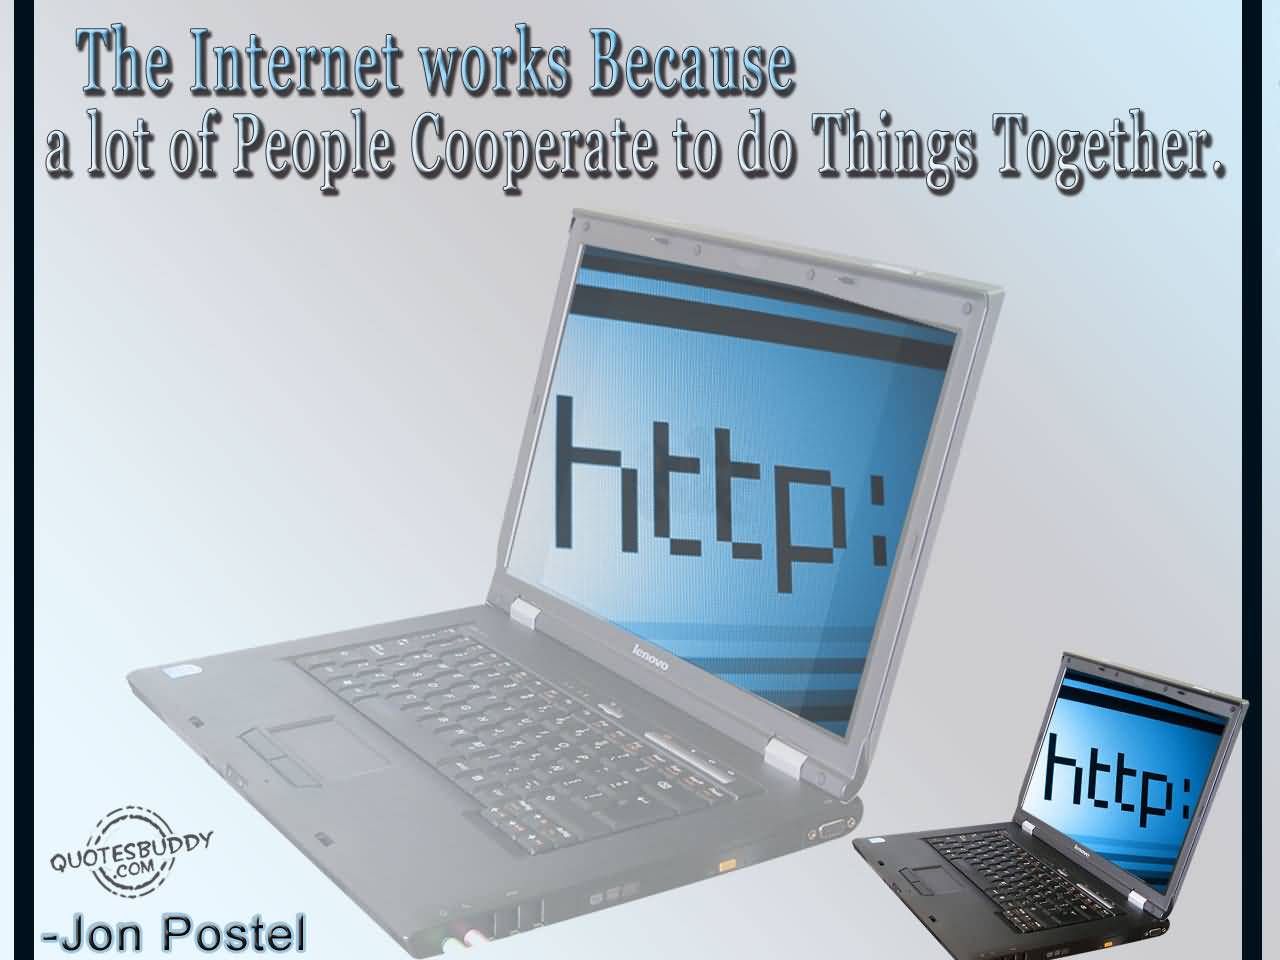 The Internet works because a lot of people cooperate to do things together. Jon Postel